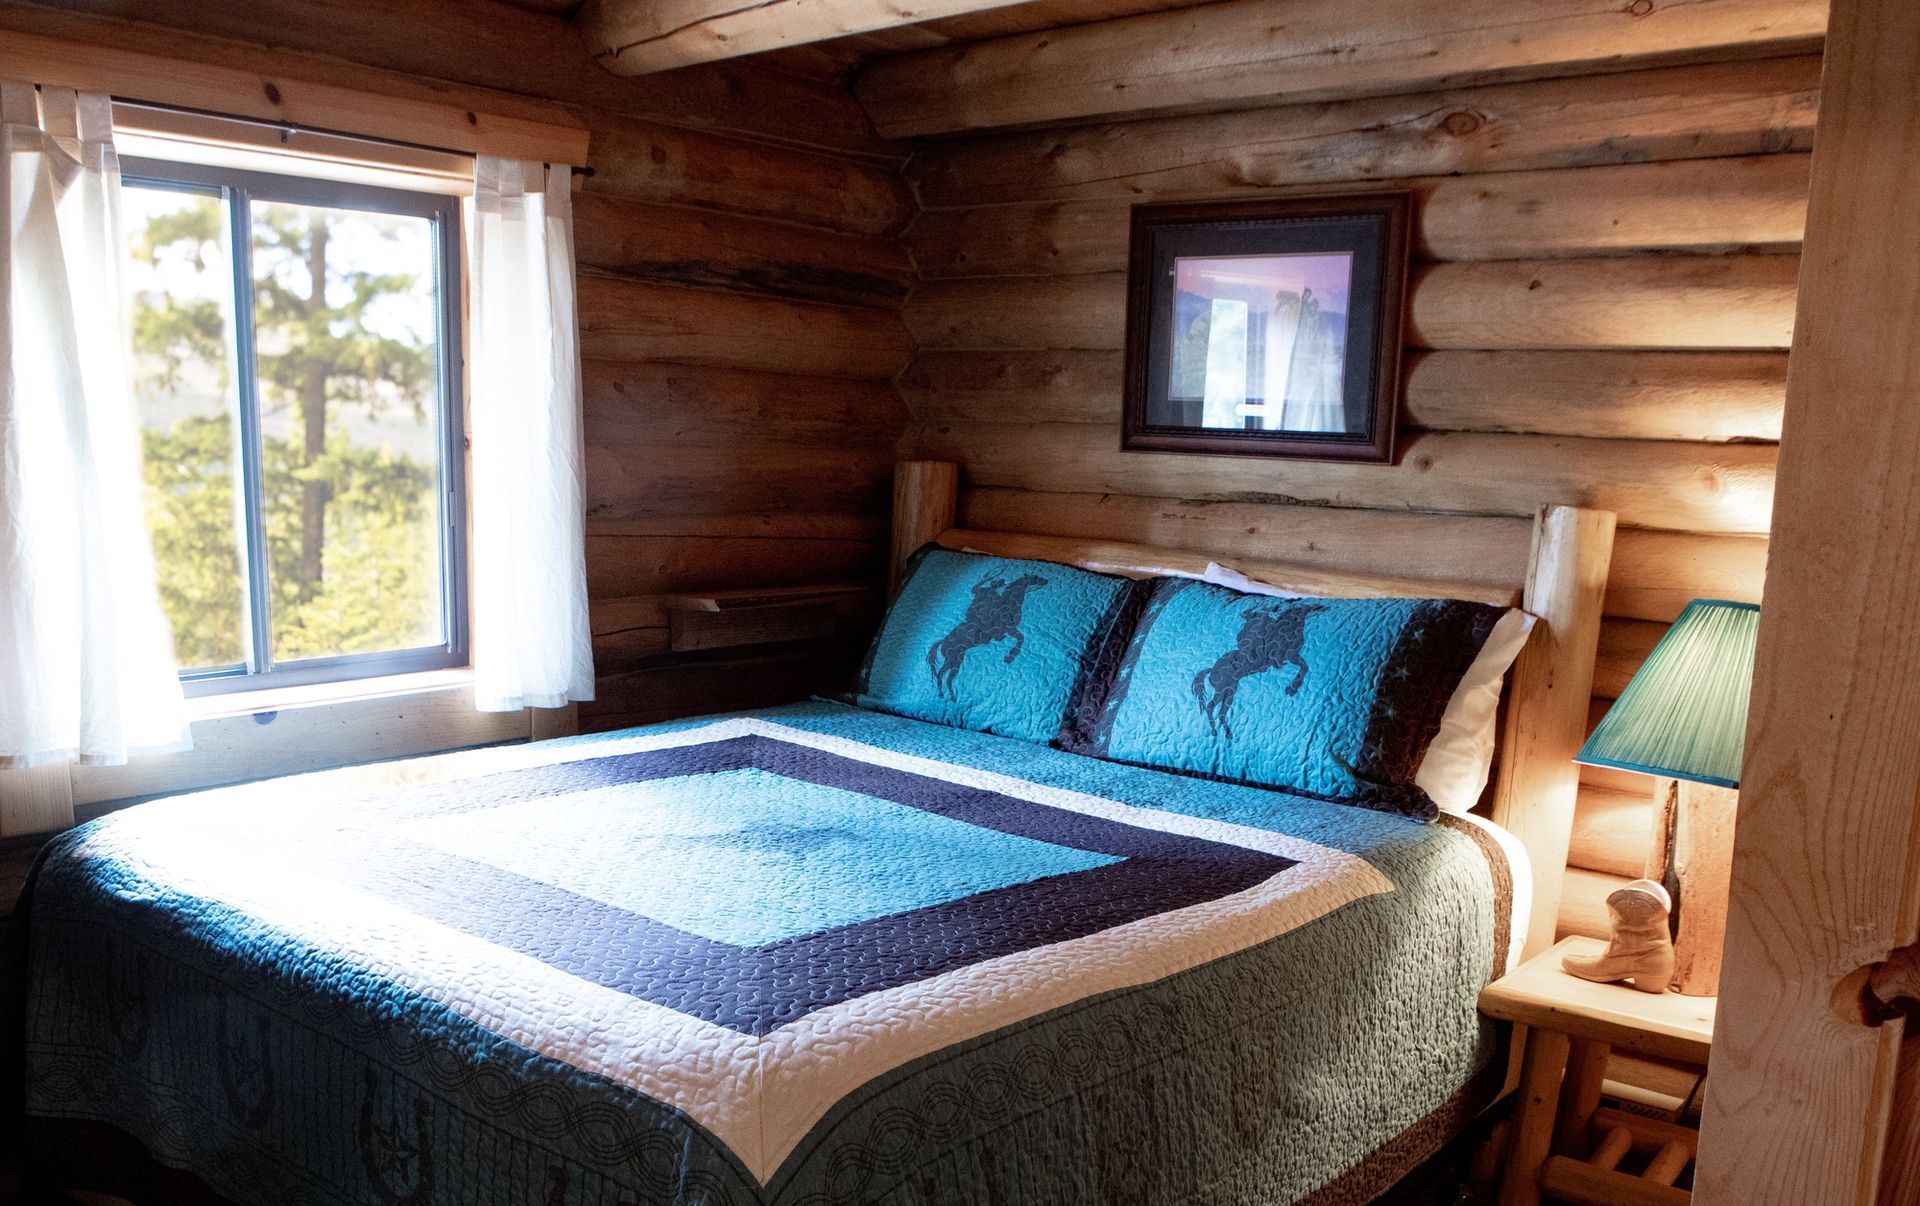 A bedroom in a log cabin with a bed and a window